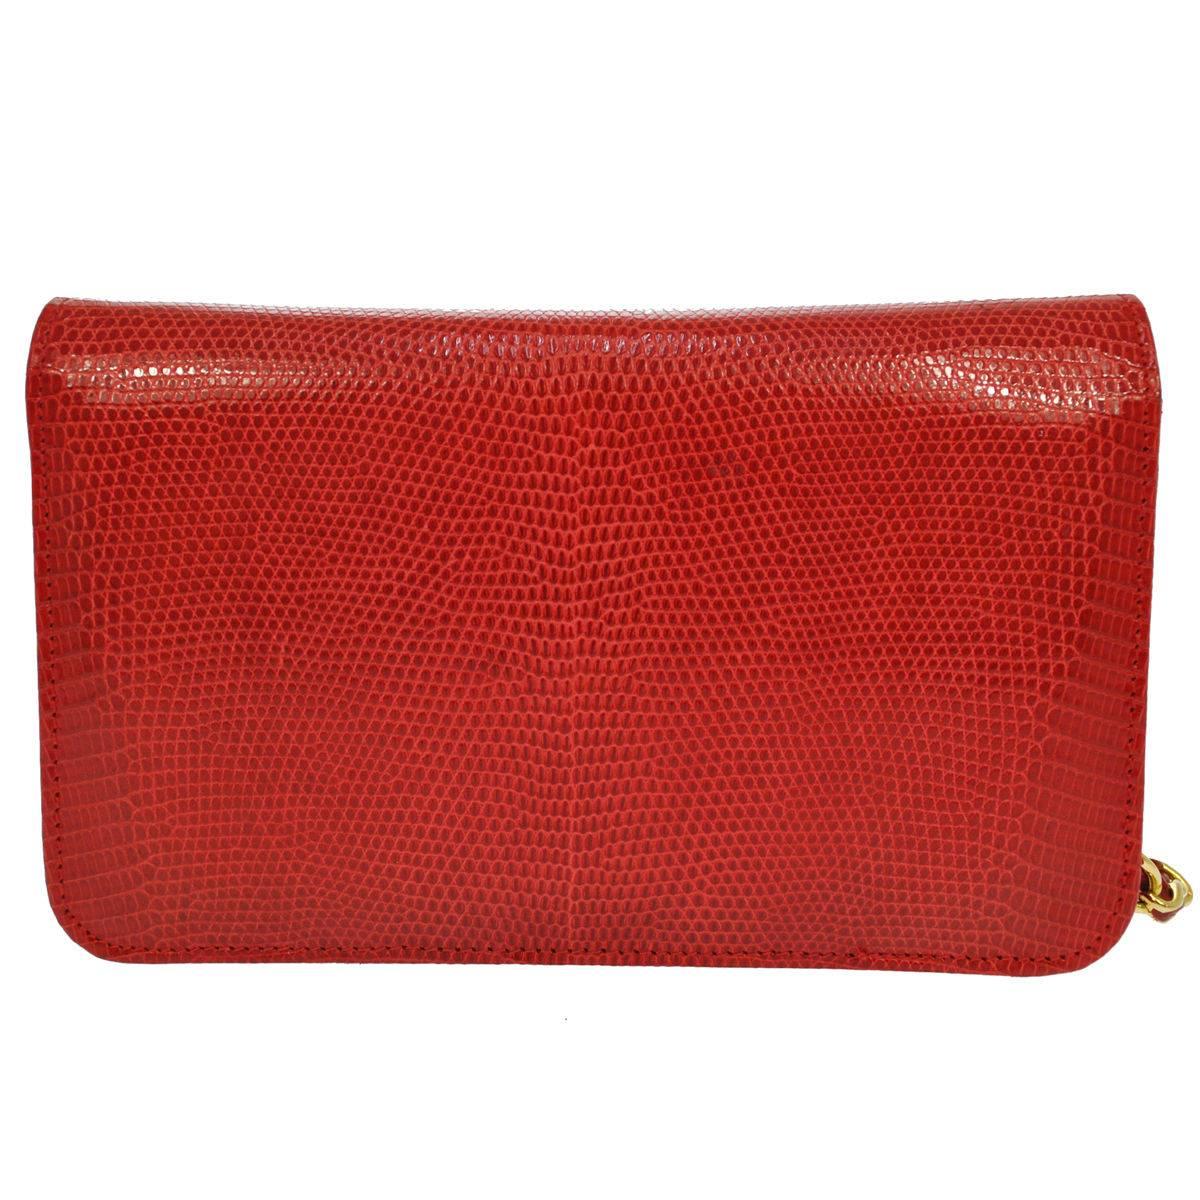 Chanel Red Lizard Gold WOC Wallet on Chain Clutch Evening Flap Shoulder Bag

Lizard
Gold tone hardware
Leather lining
Date code present
Made in France
Shoulder strap drop 17"
Measures 7.5" W × 4.5" H x 2.5" D  